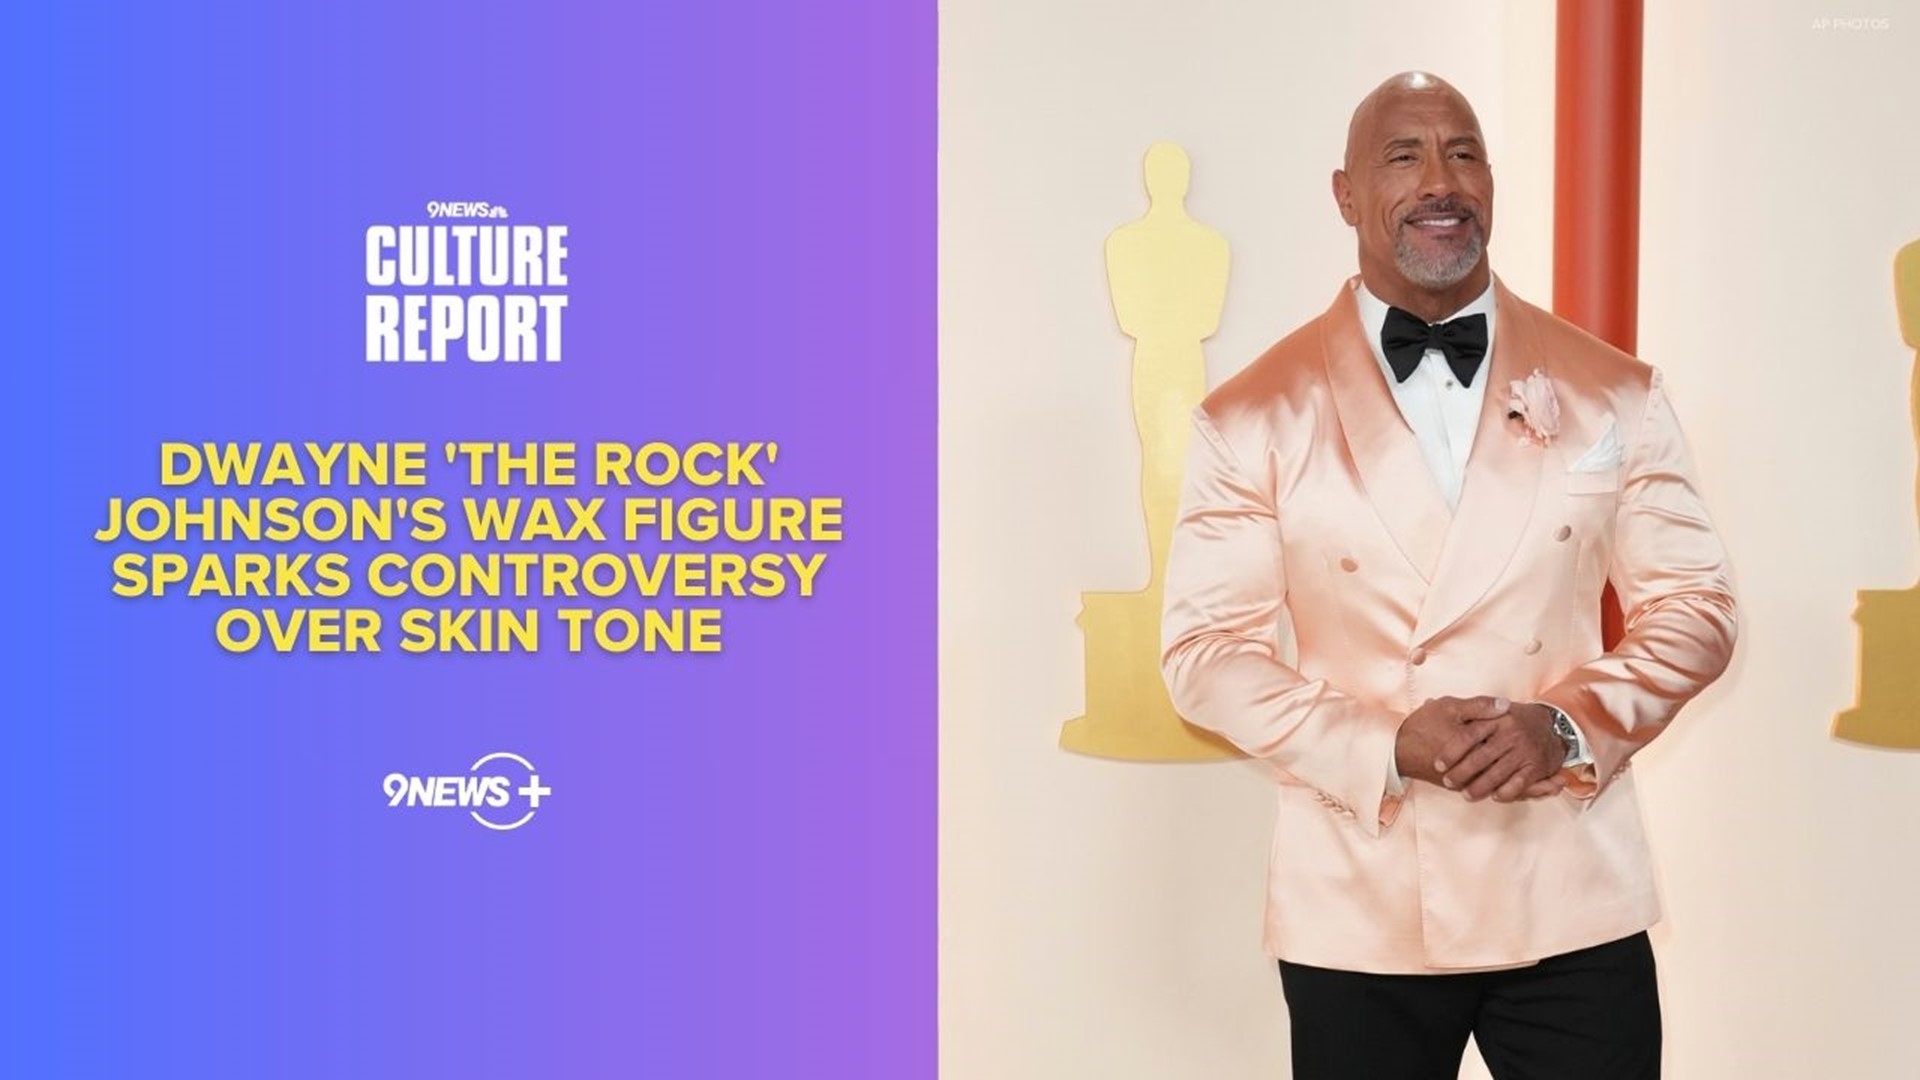 A French museum is making swift changes to Dwayne Johnson’s wax model after it received backlash for its lighter skin.